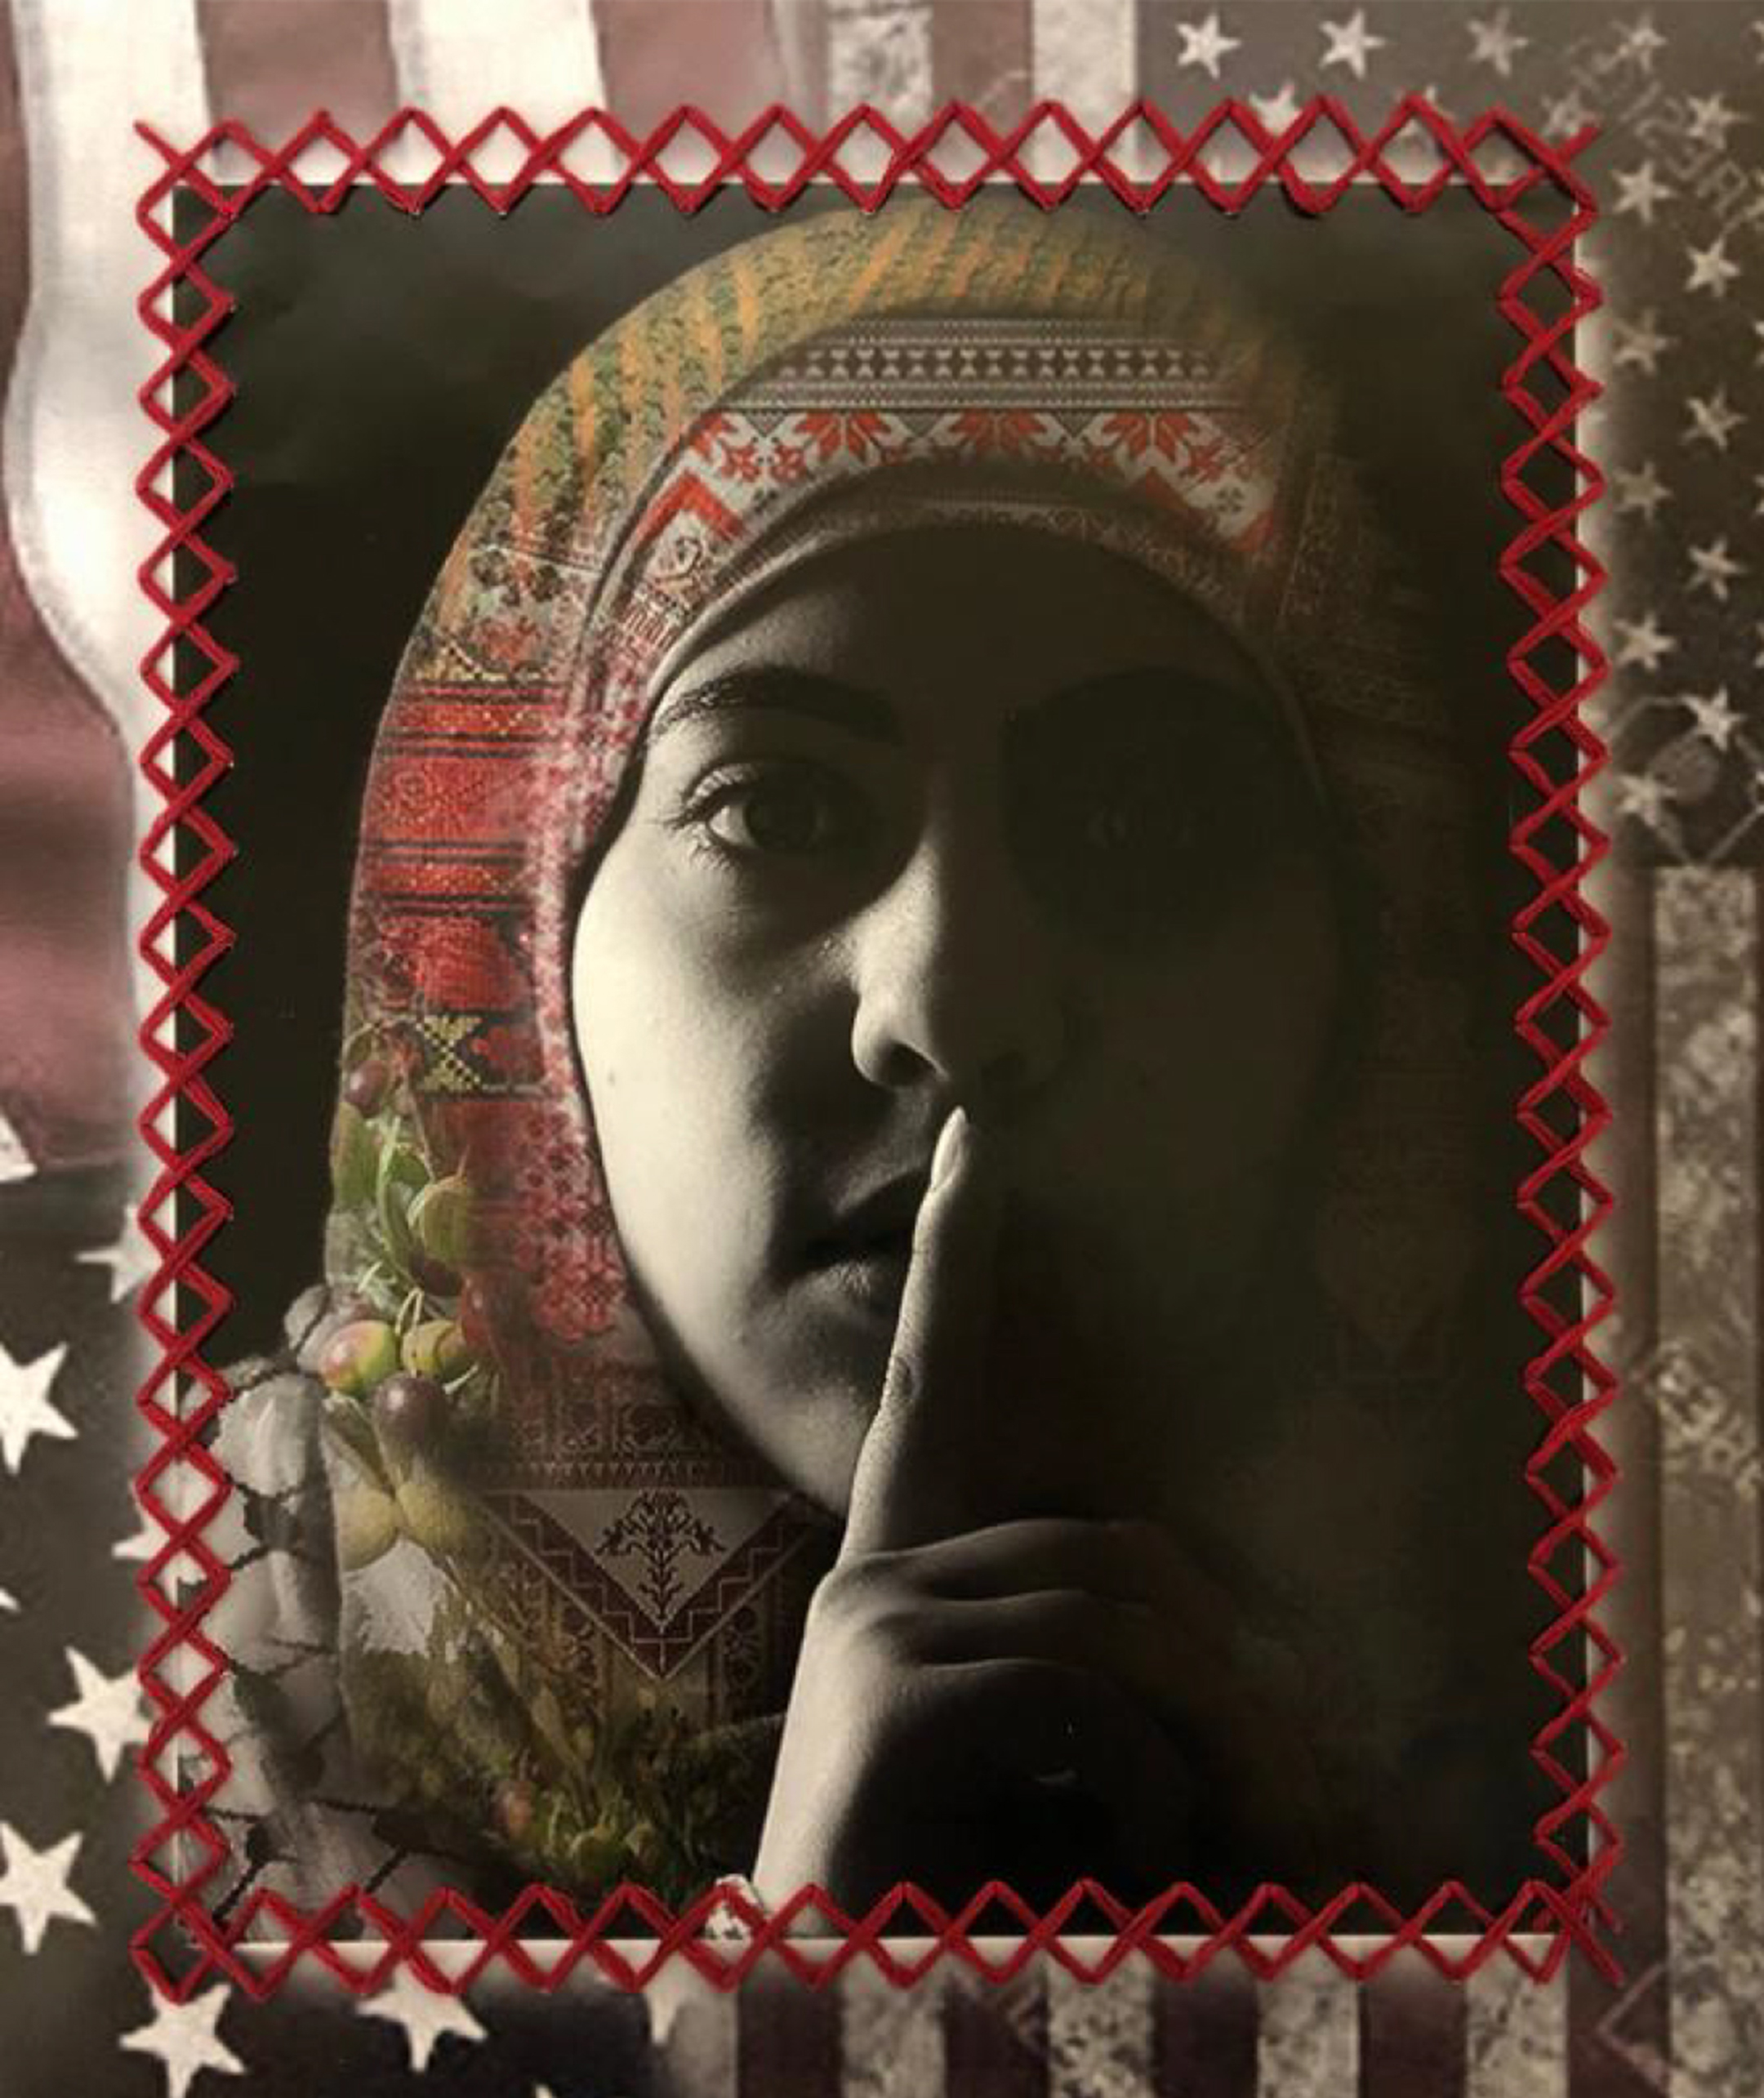 Photo montage of a young woman in a head covering with her finger over her mouth, with the image stitched onto a background of faded american flags